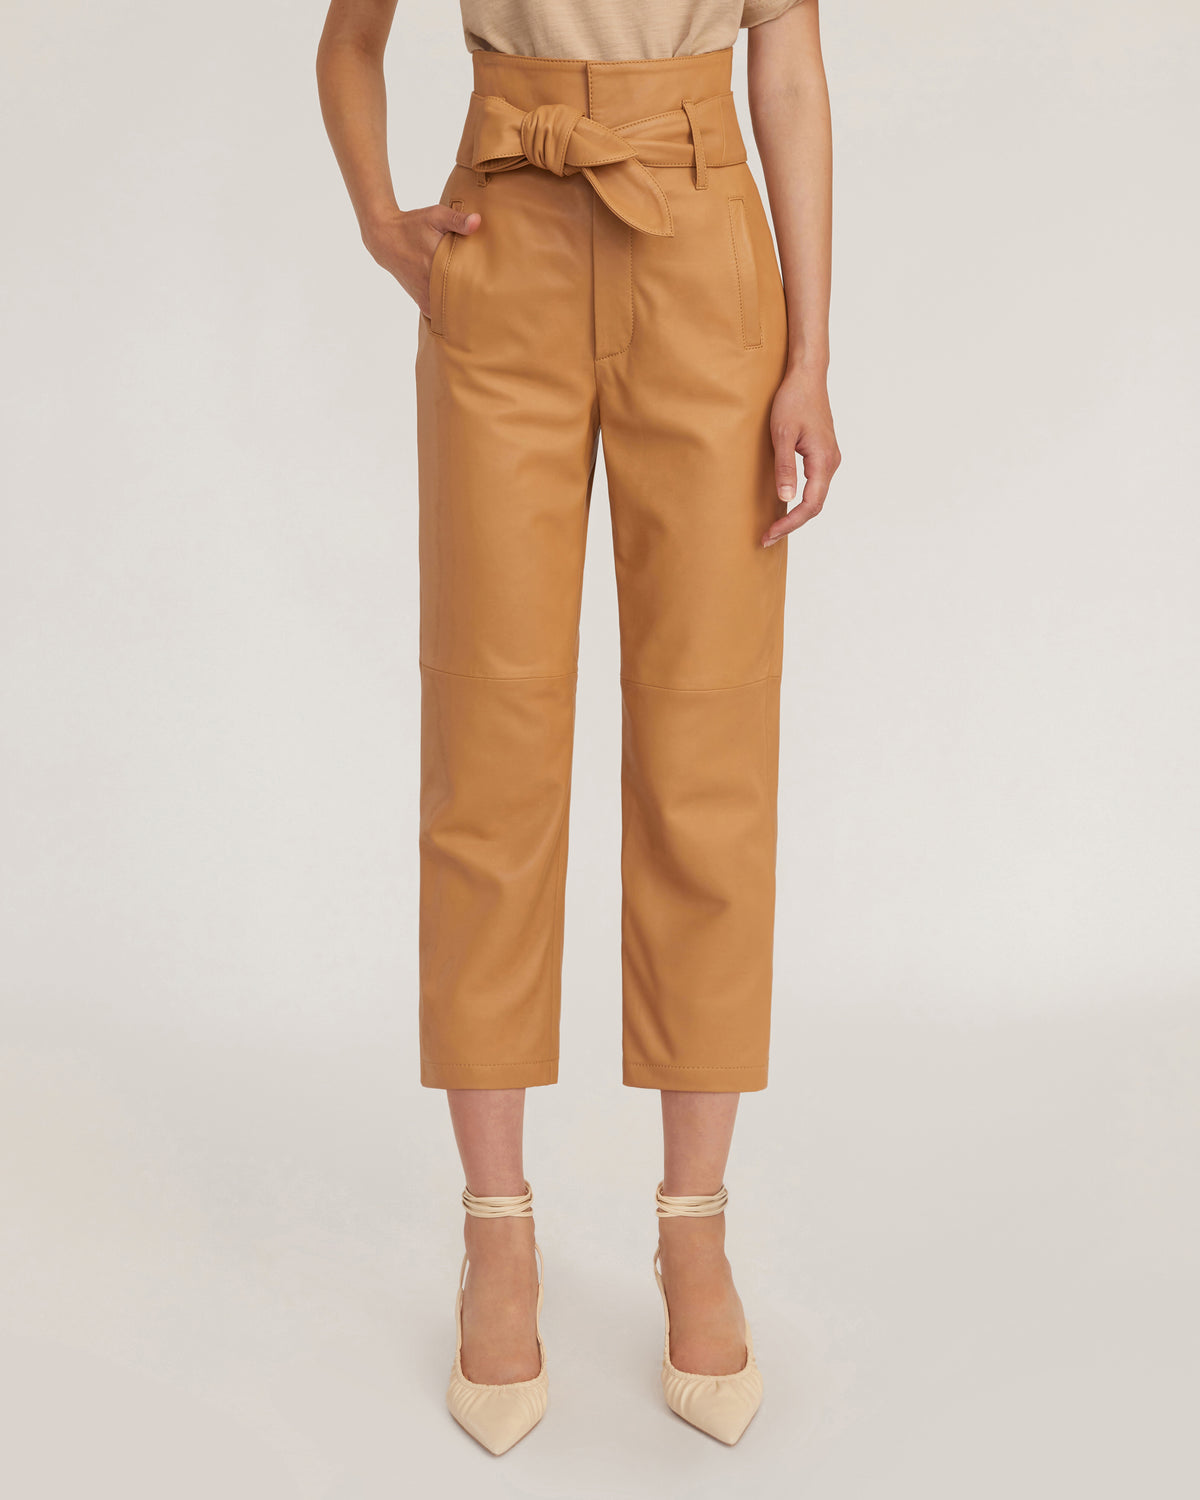 Brennan Leather Pant in Fawn